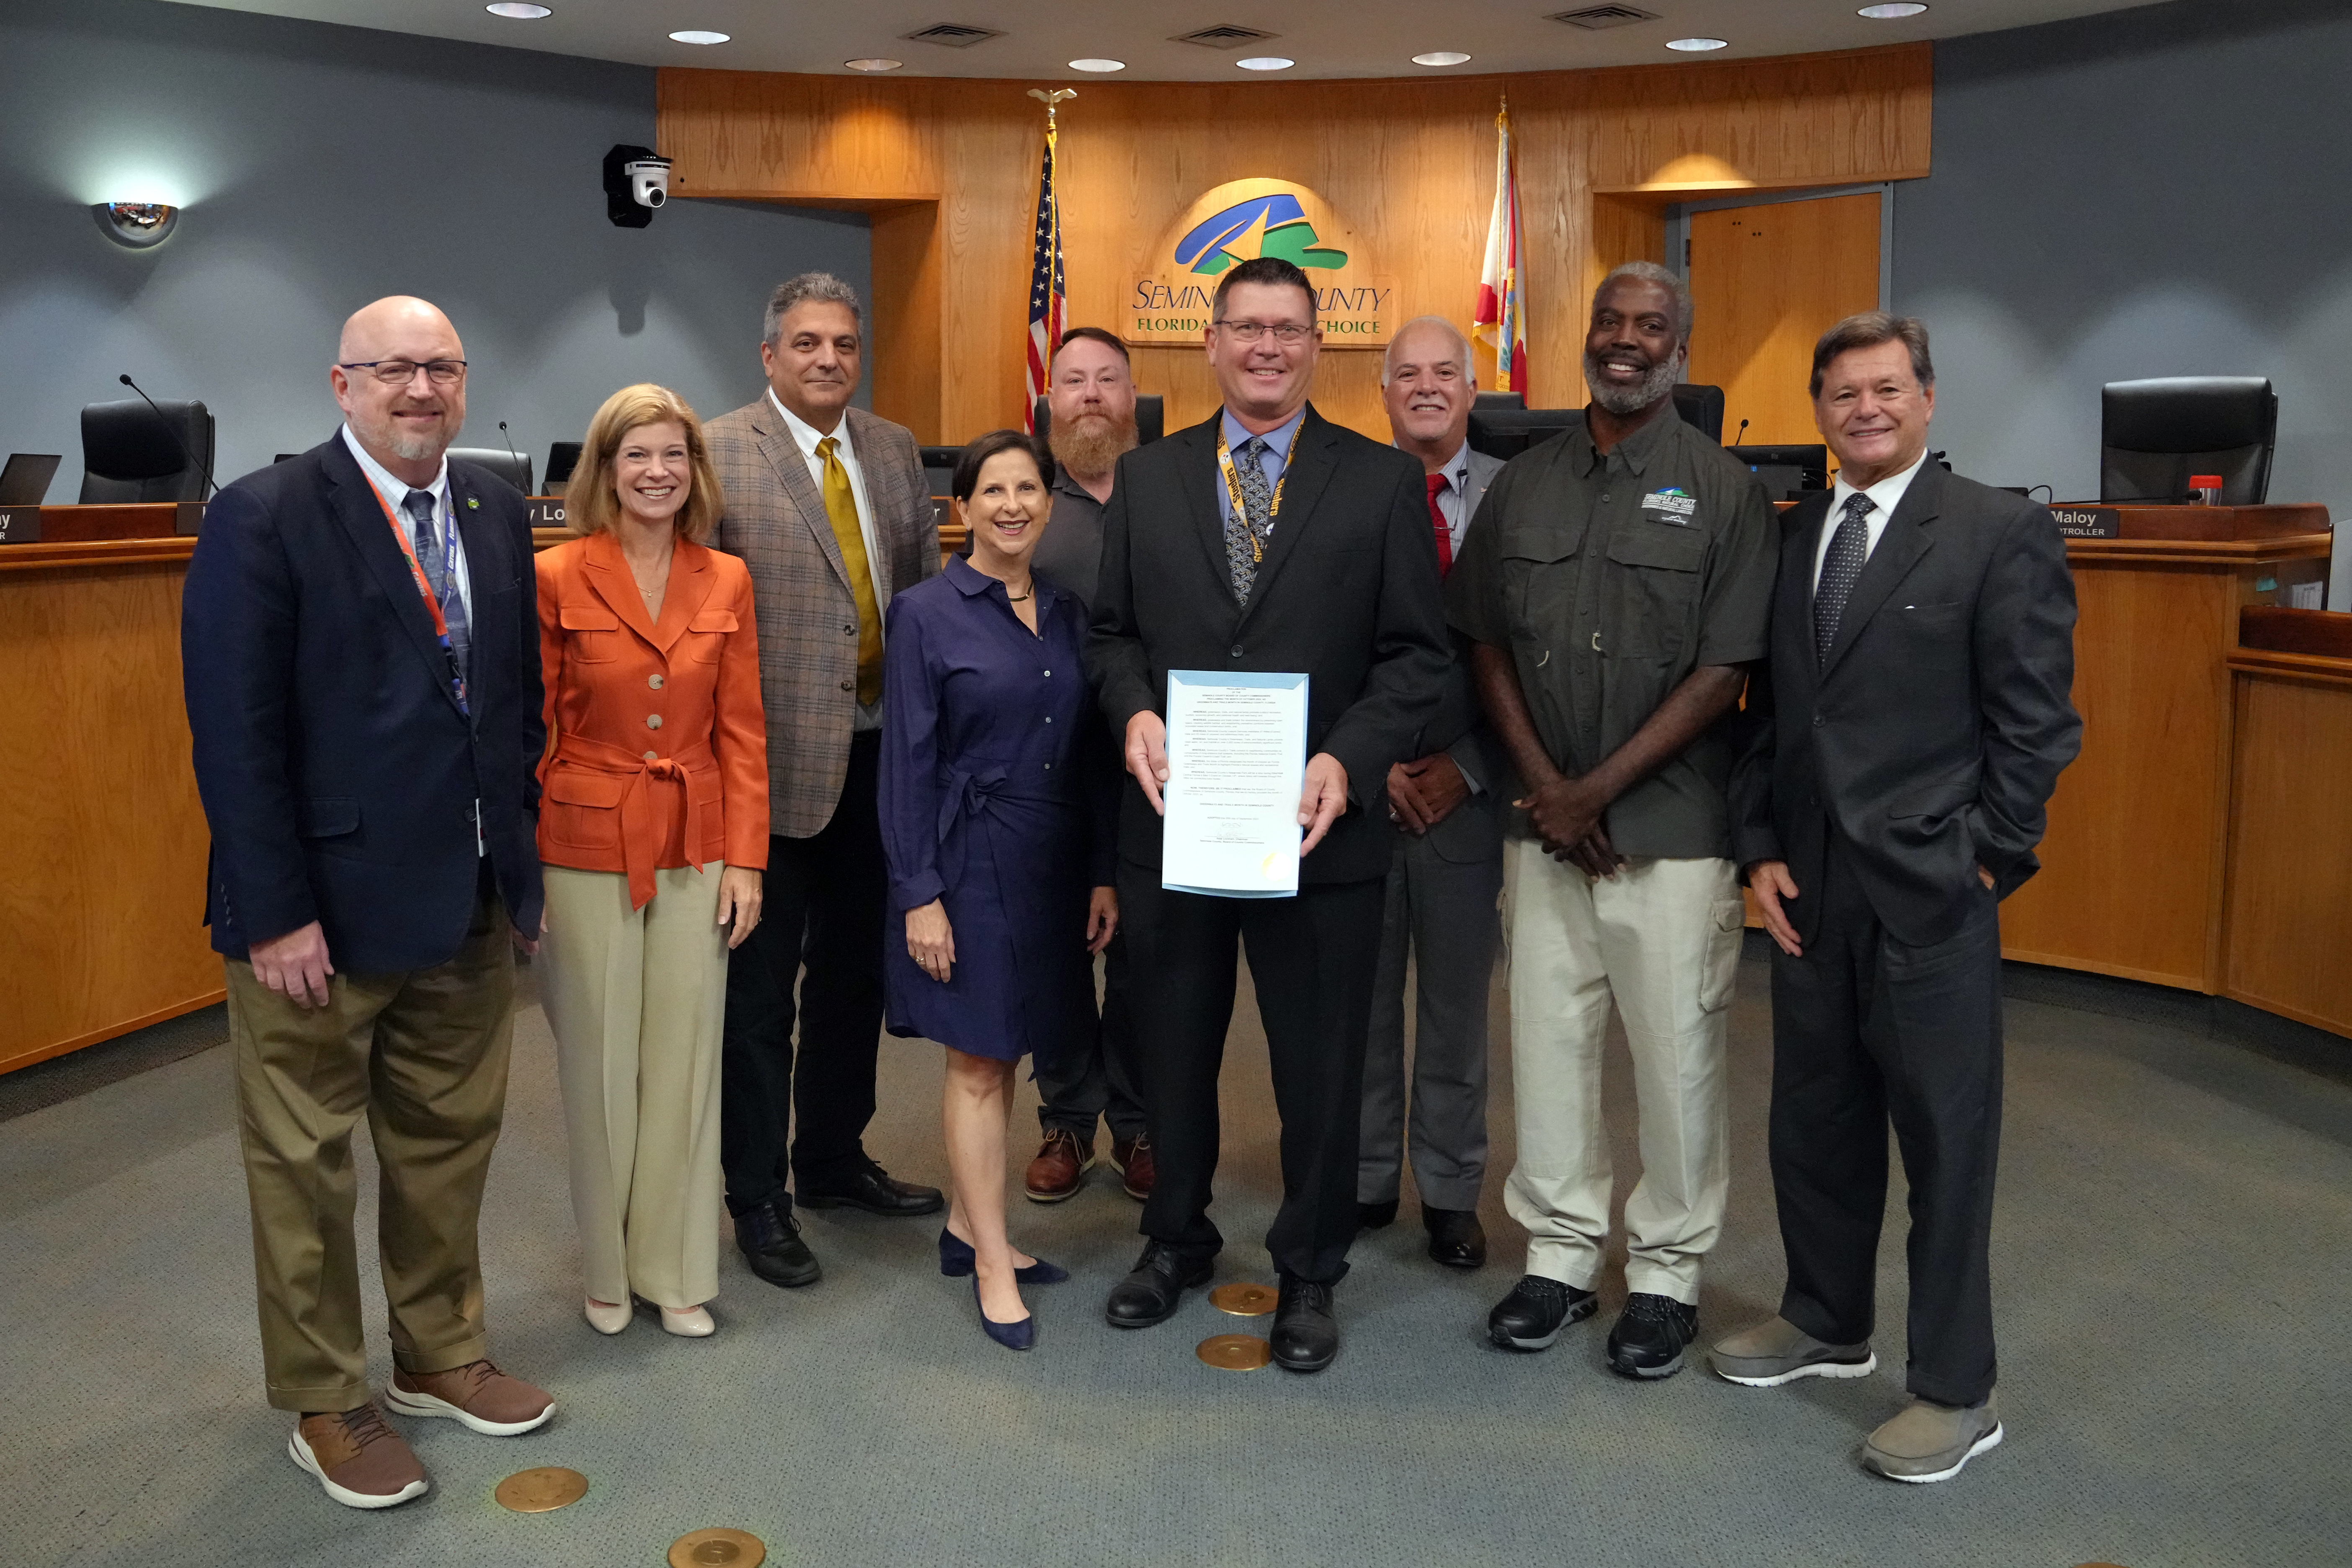 Proclamation - Proclaiming October as Greenways and Trails Month (Rick Durr, Leisure Services Director)